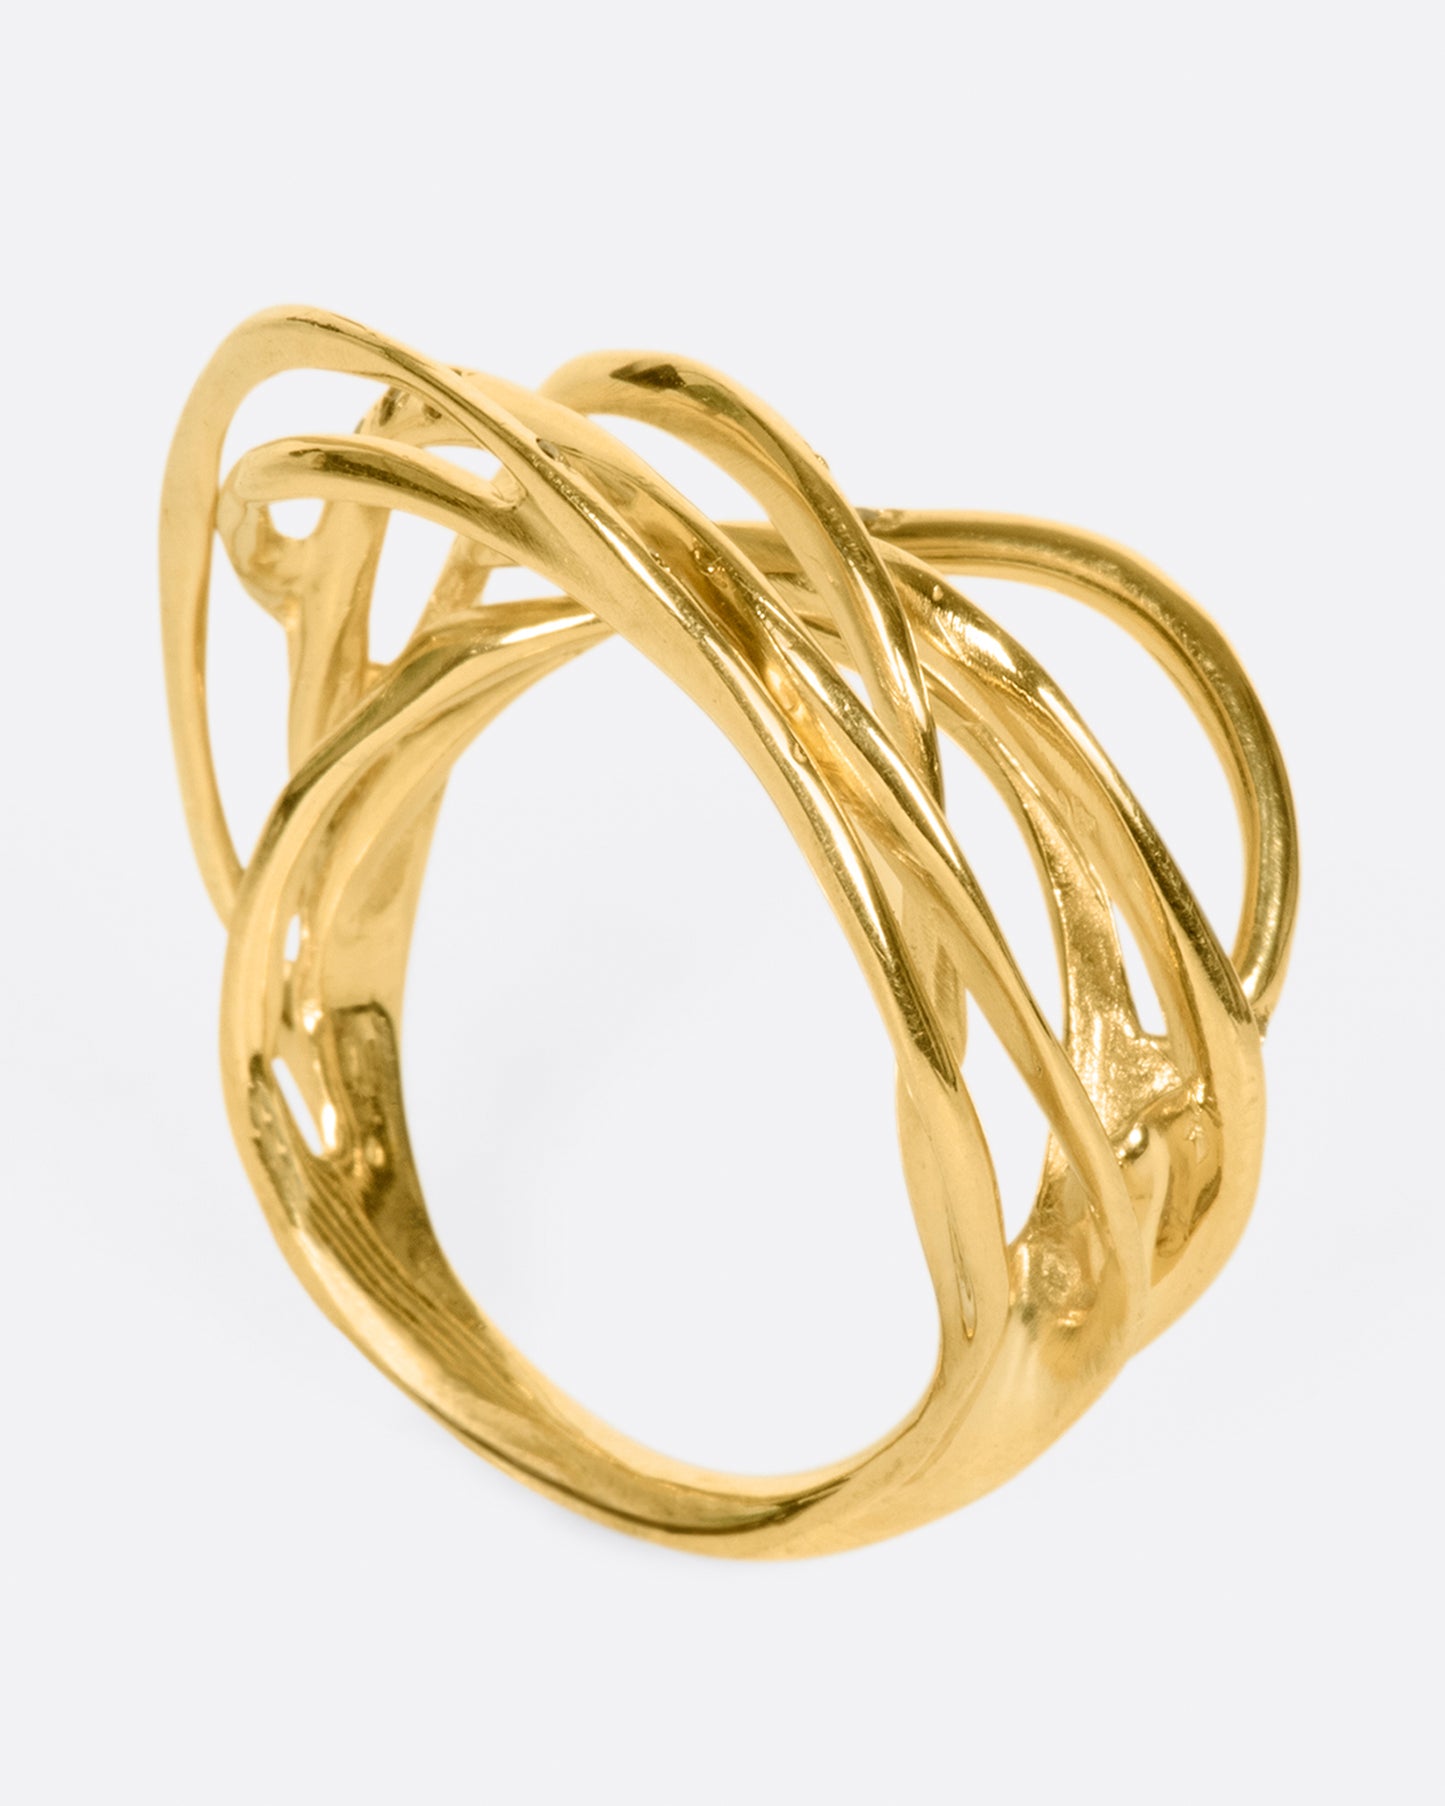 A yellow gold ring formed from multiple strands of gold, dotted with cognac diamonds. Shown from the side.